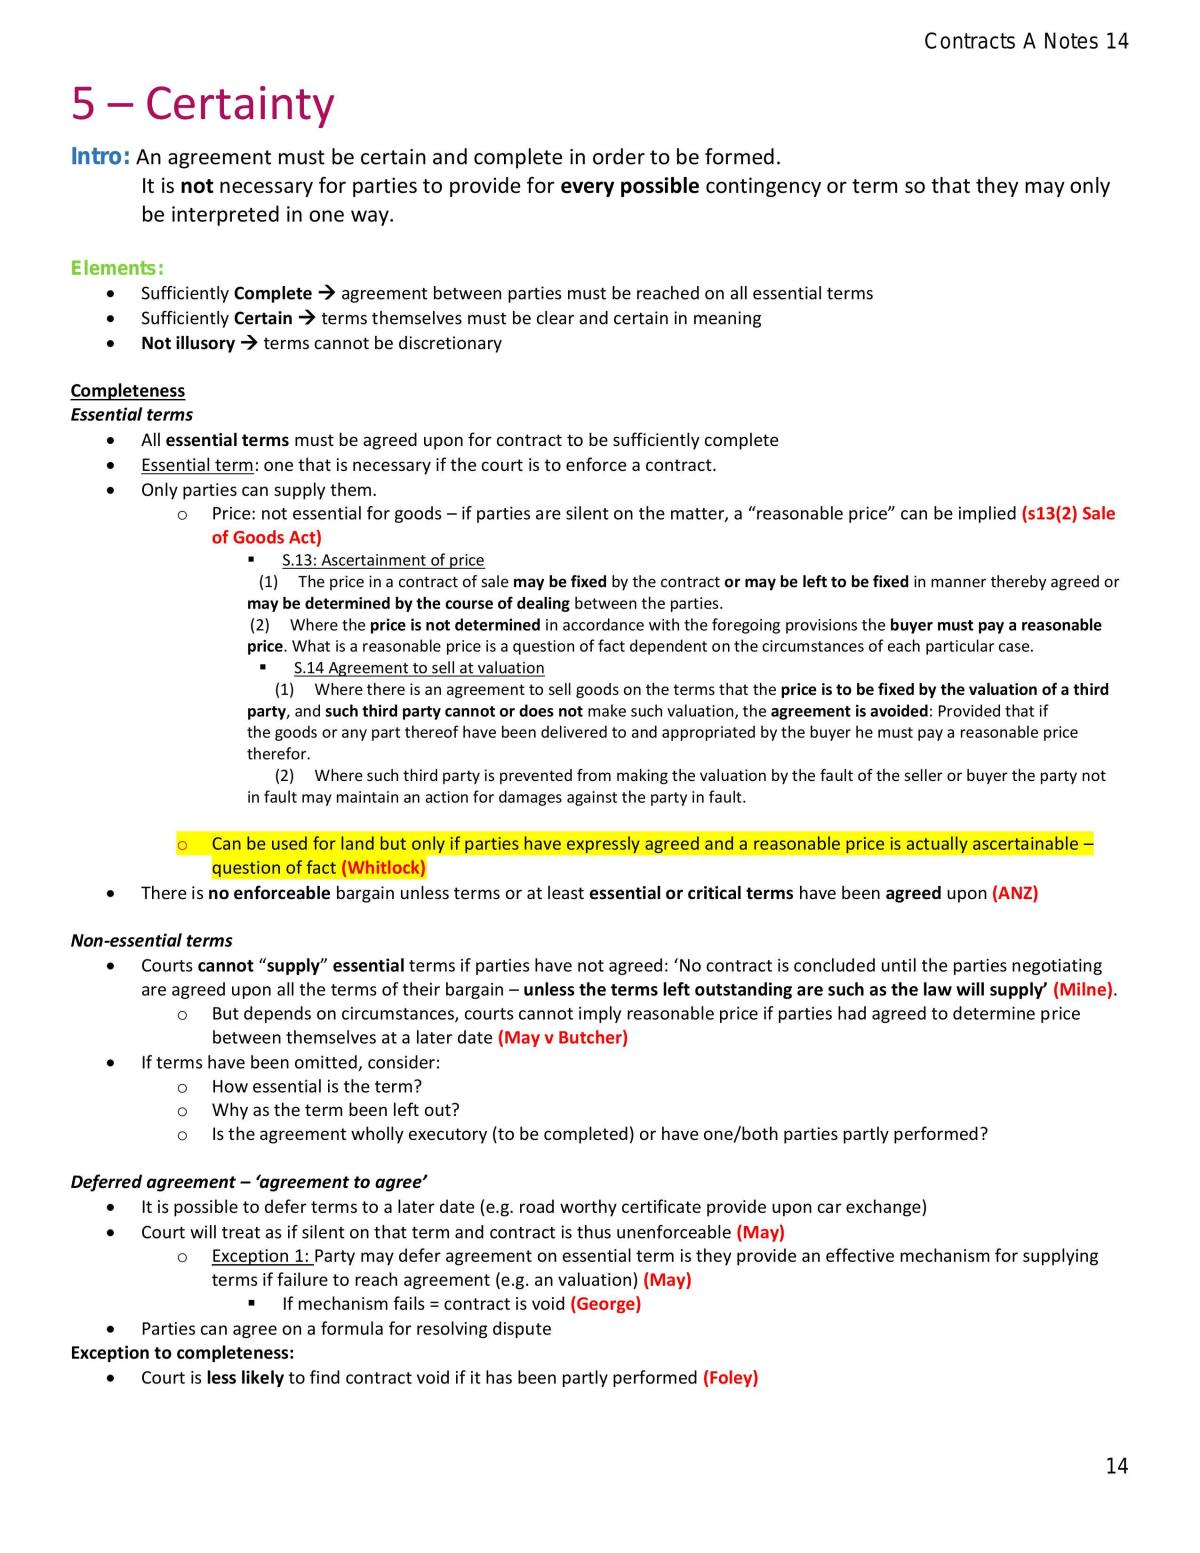 Contract A (HD notes) - Page 14